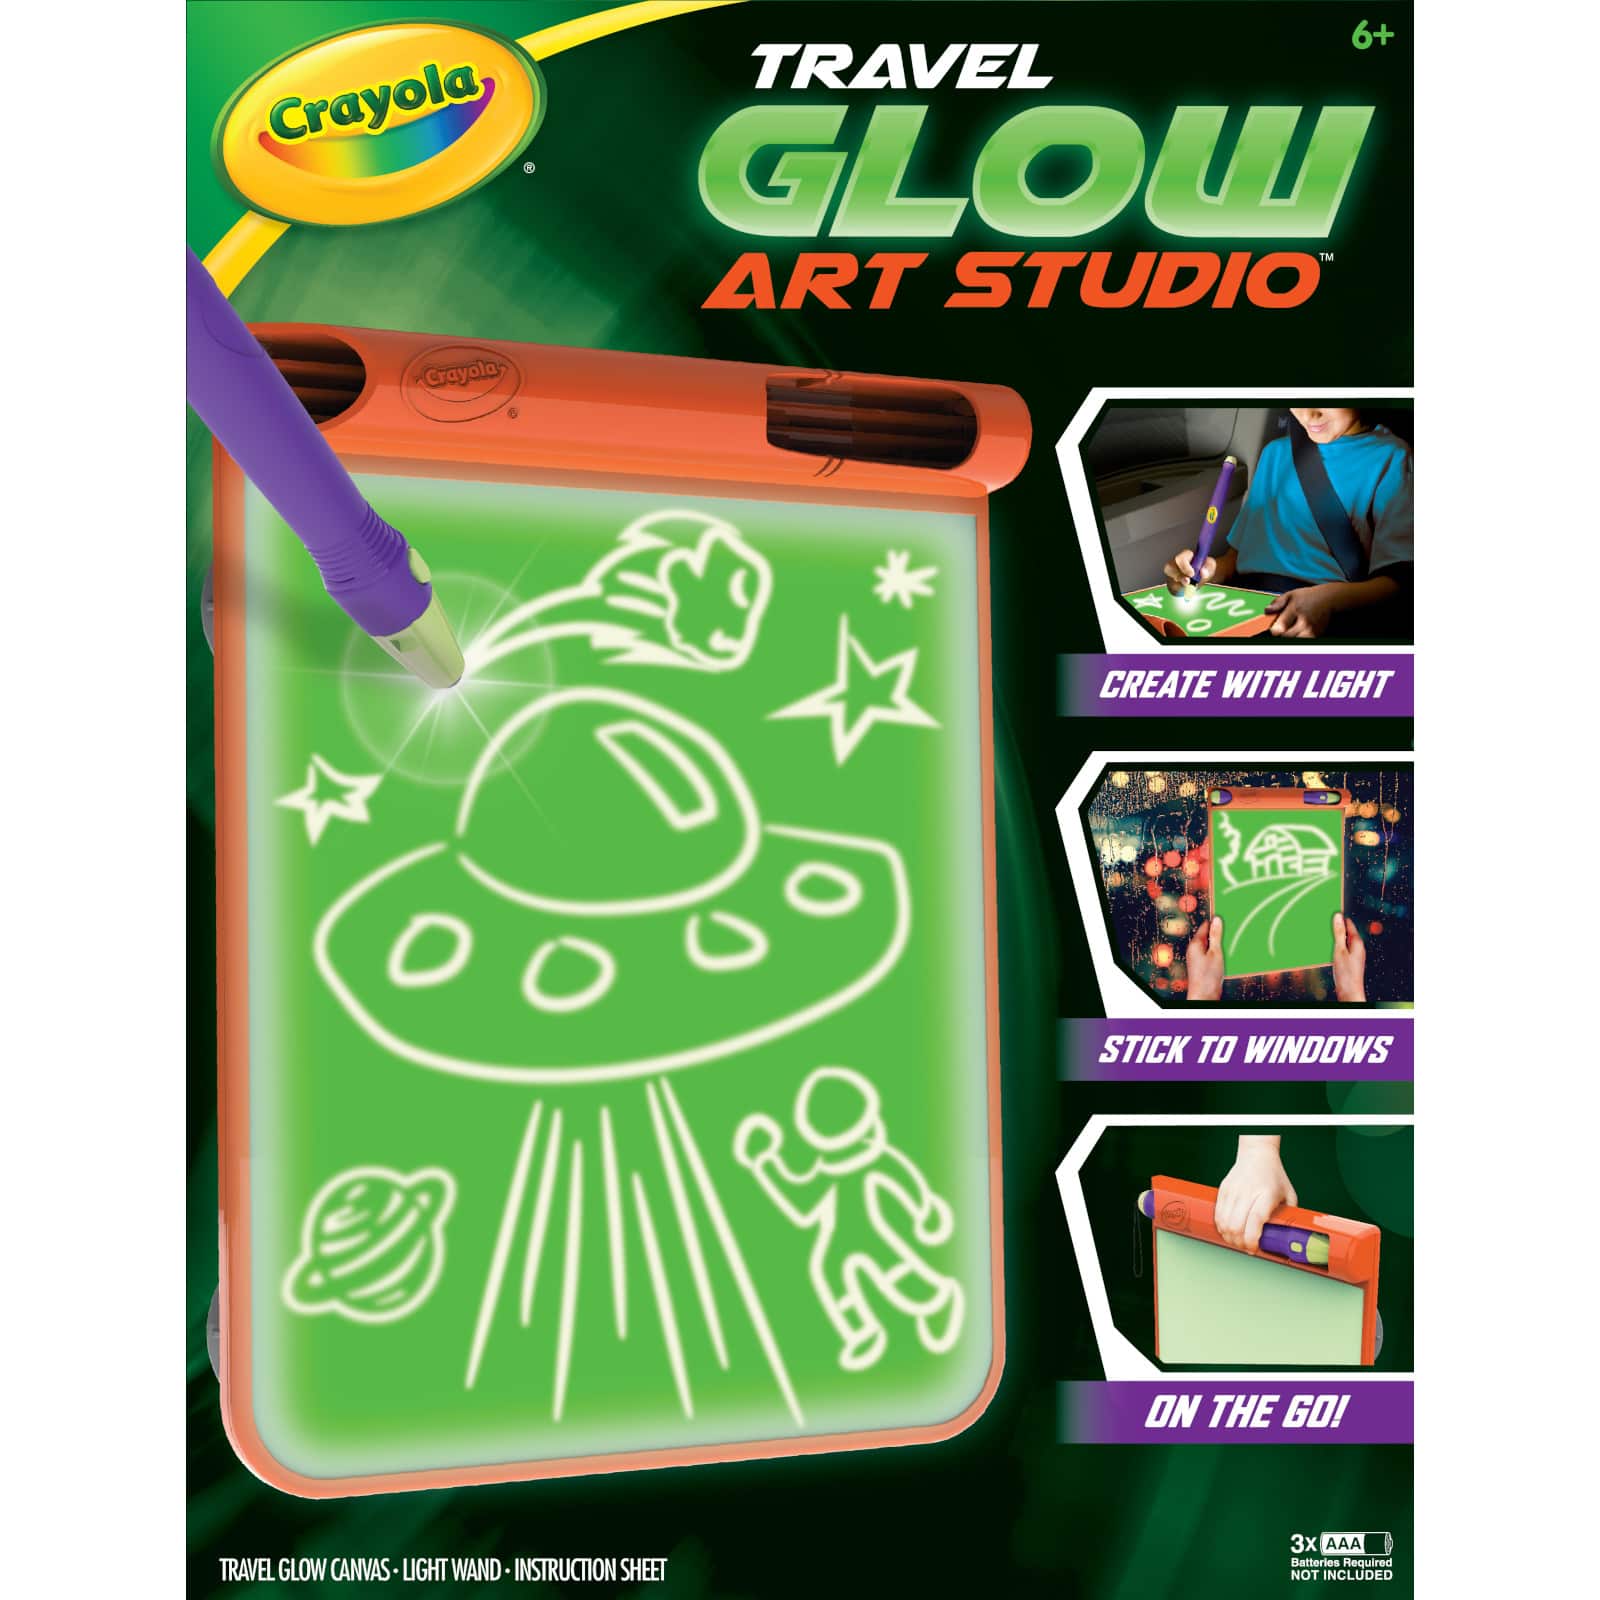 CRAYOLA ULTIMATE LIGHT BOARD - The Toy Insider